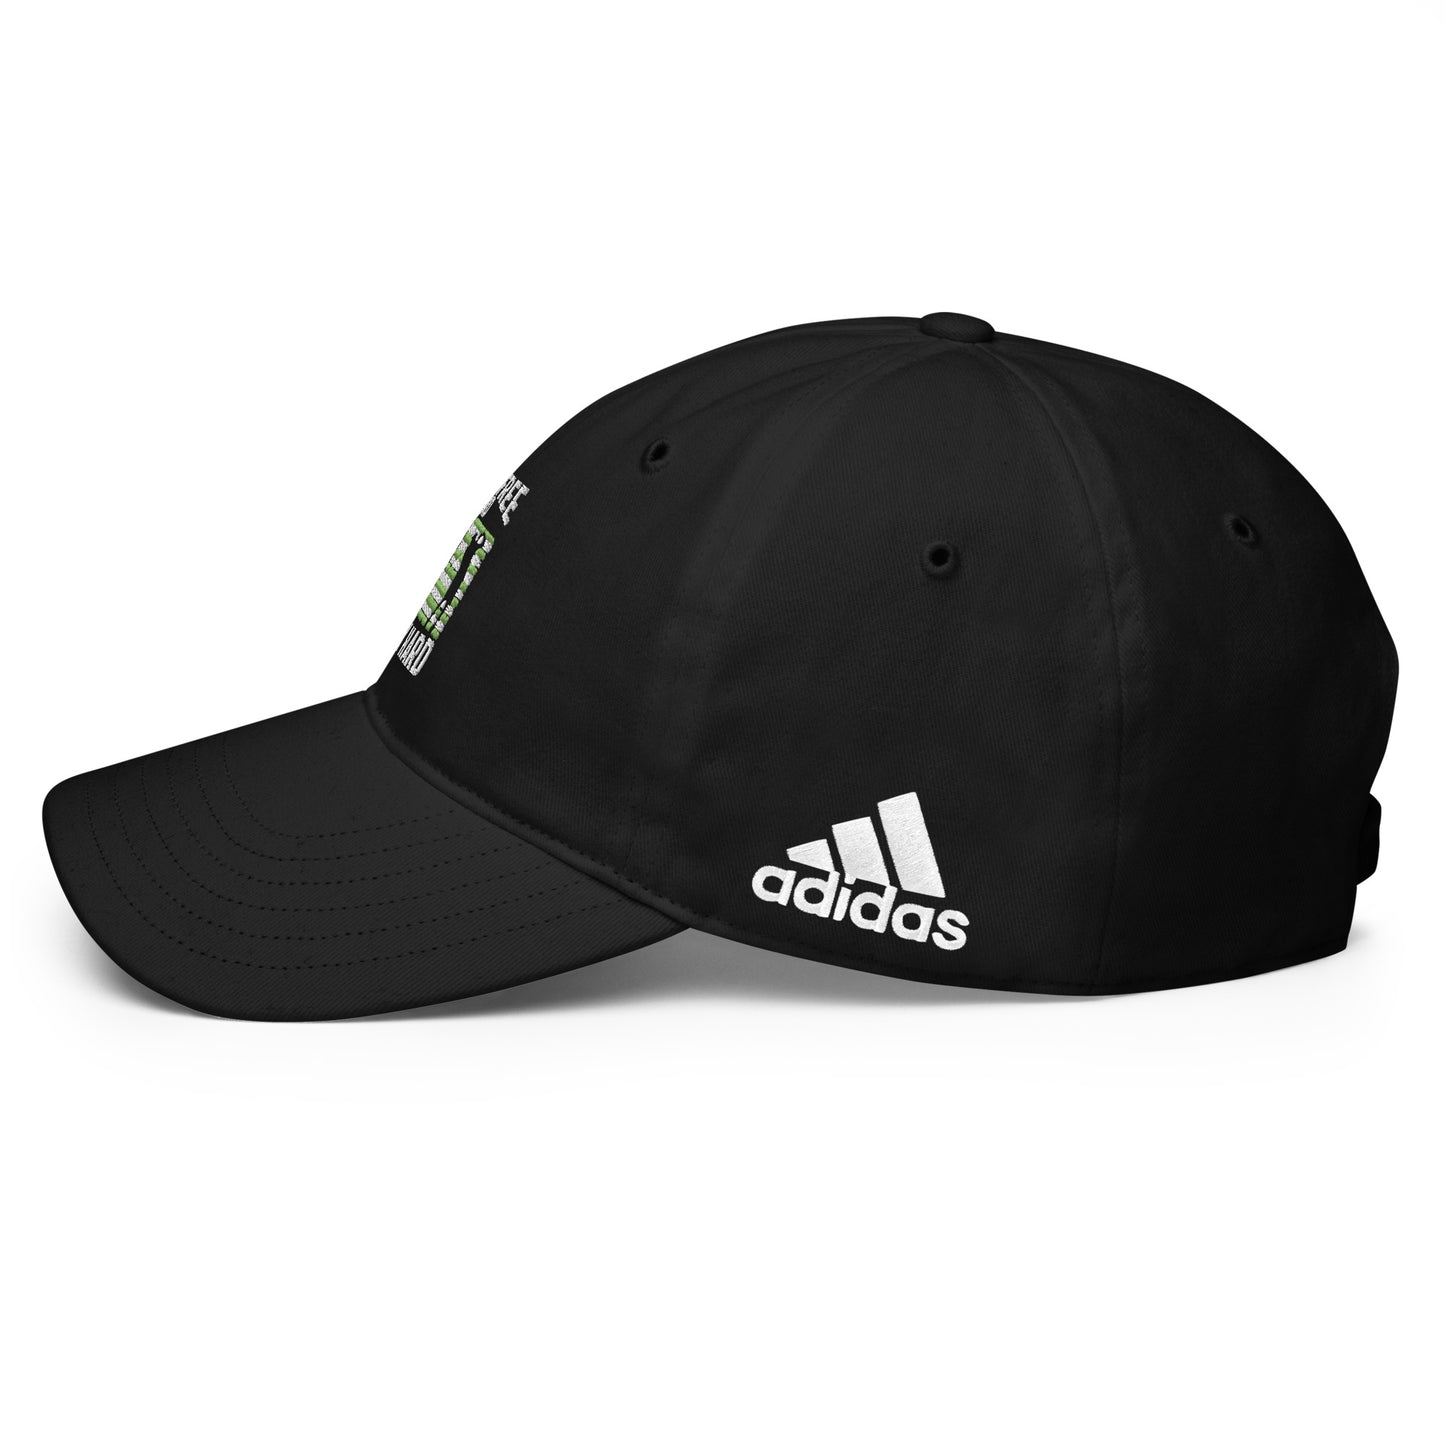 Adidas 'Live Free and Play Hard' Performance Golf Cap (Military Appreciation)